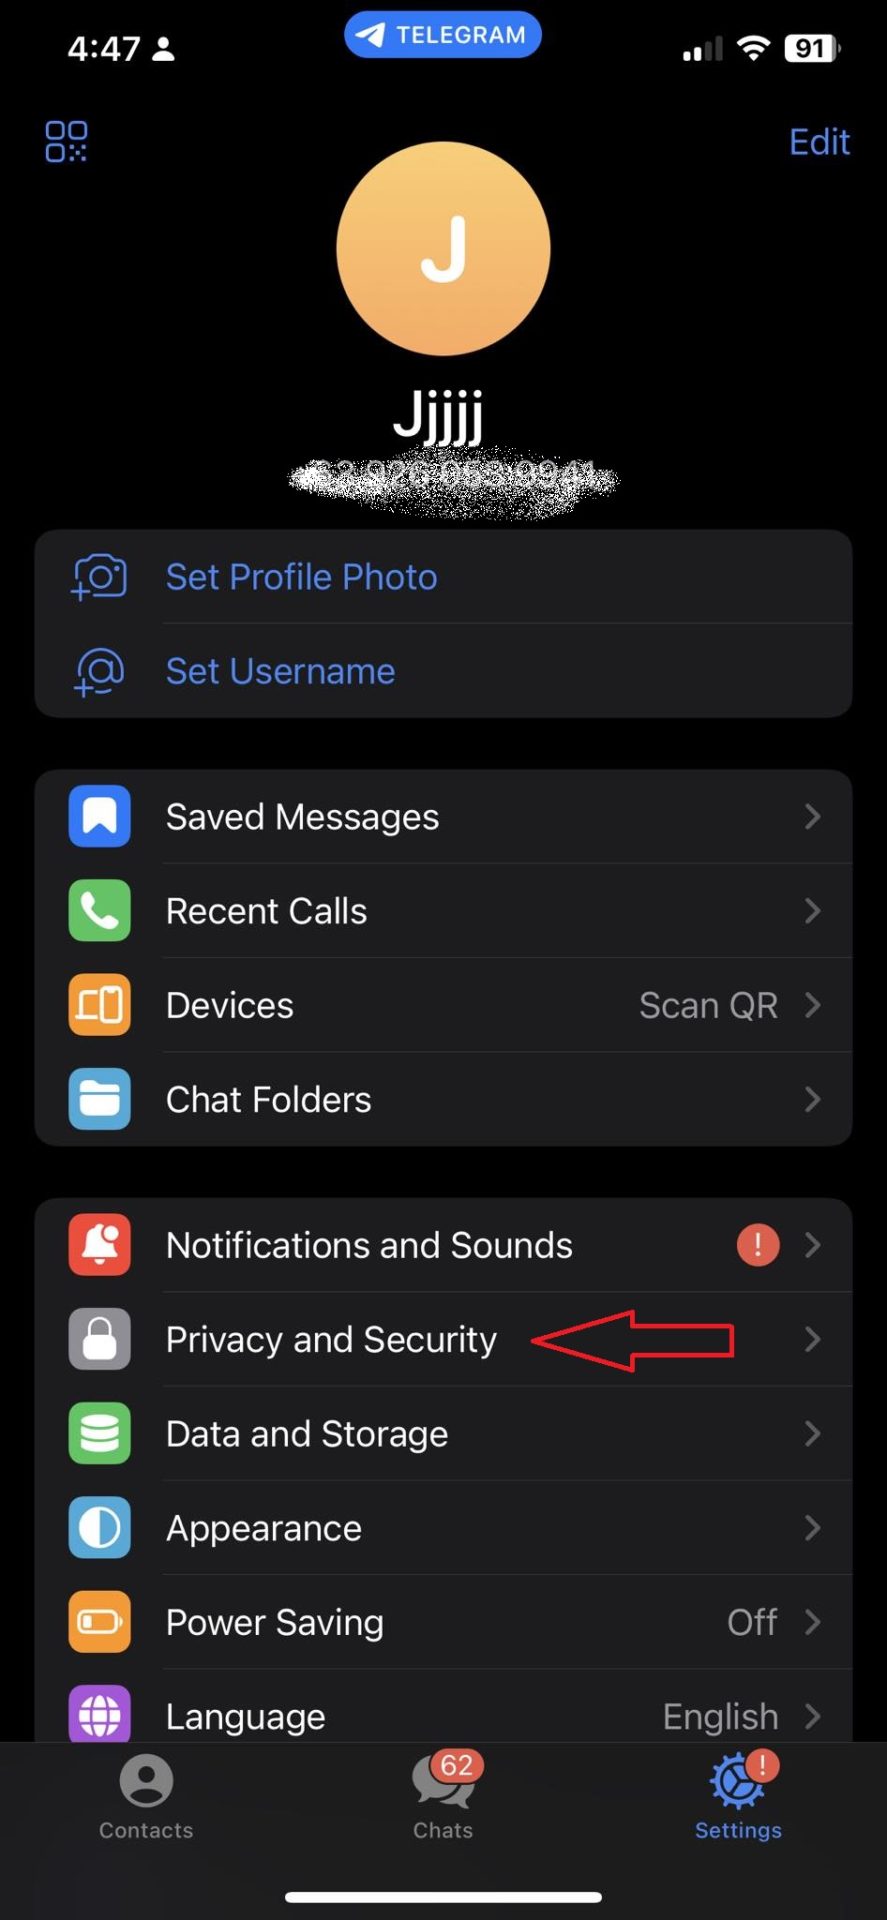 Privacy and Security settings location on Telegram